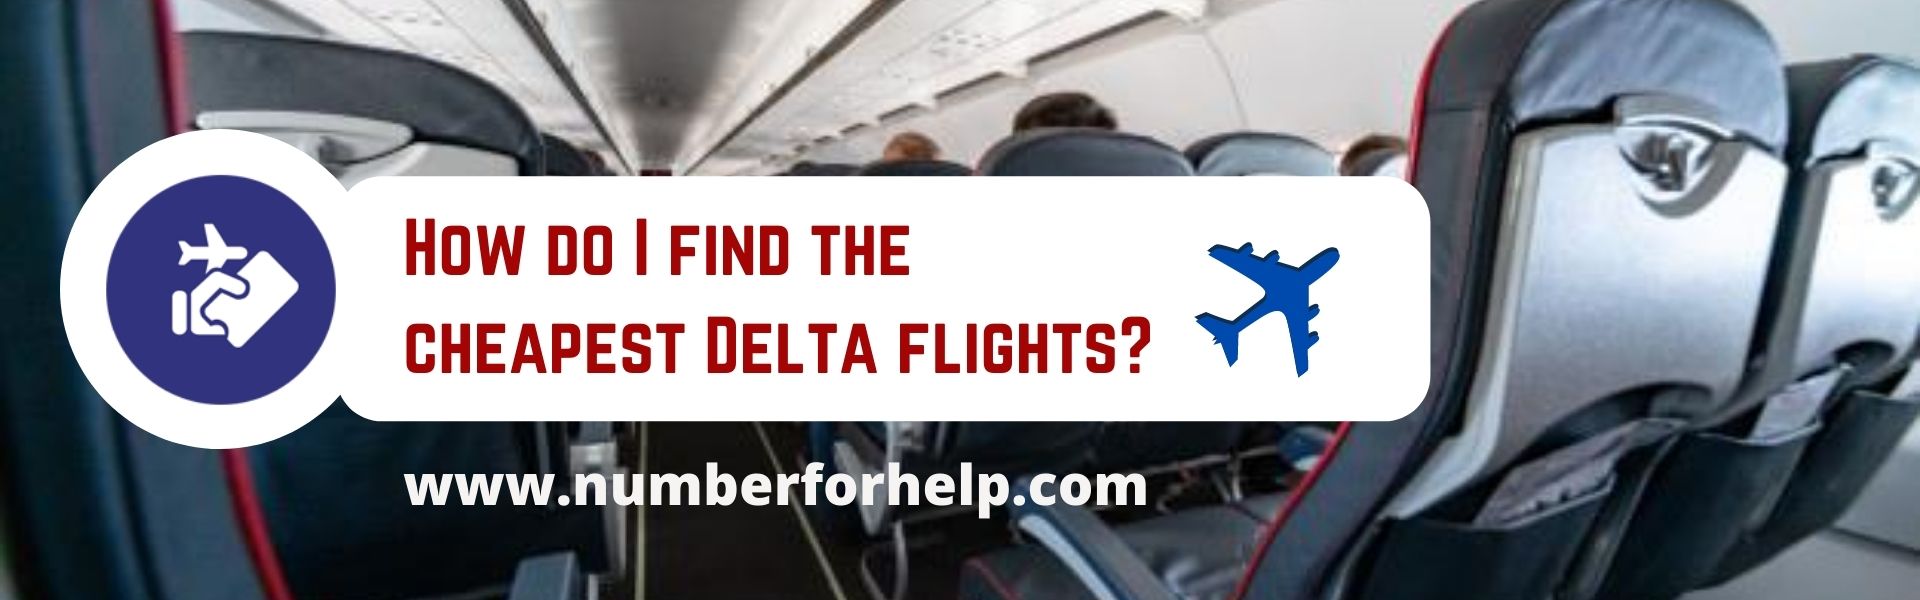 2020-08-21-08-46-25How do I find the cheapest Delta flights